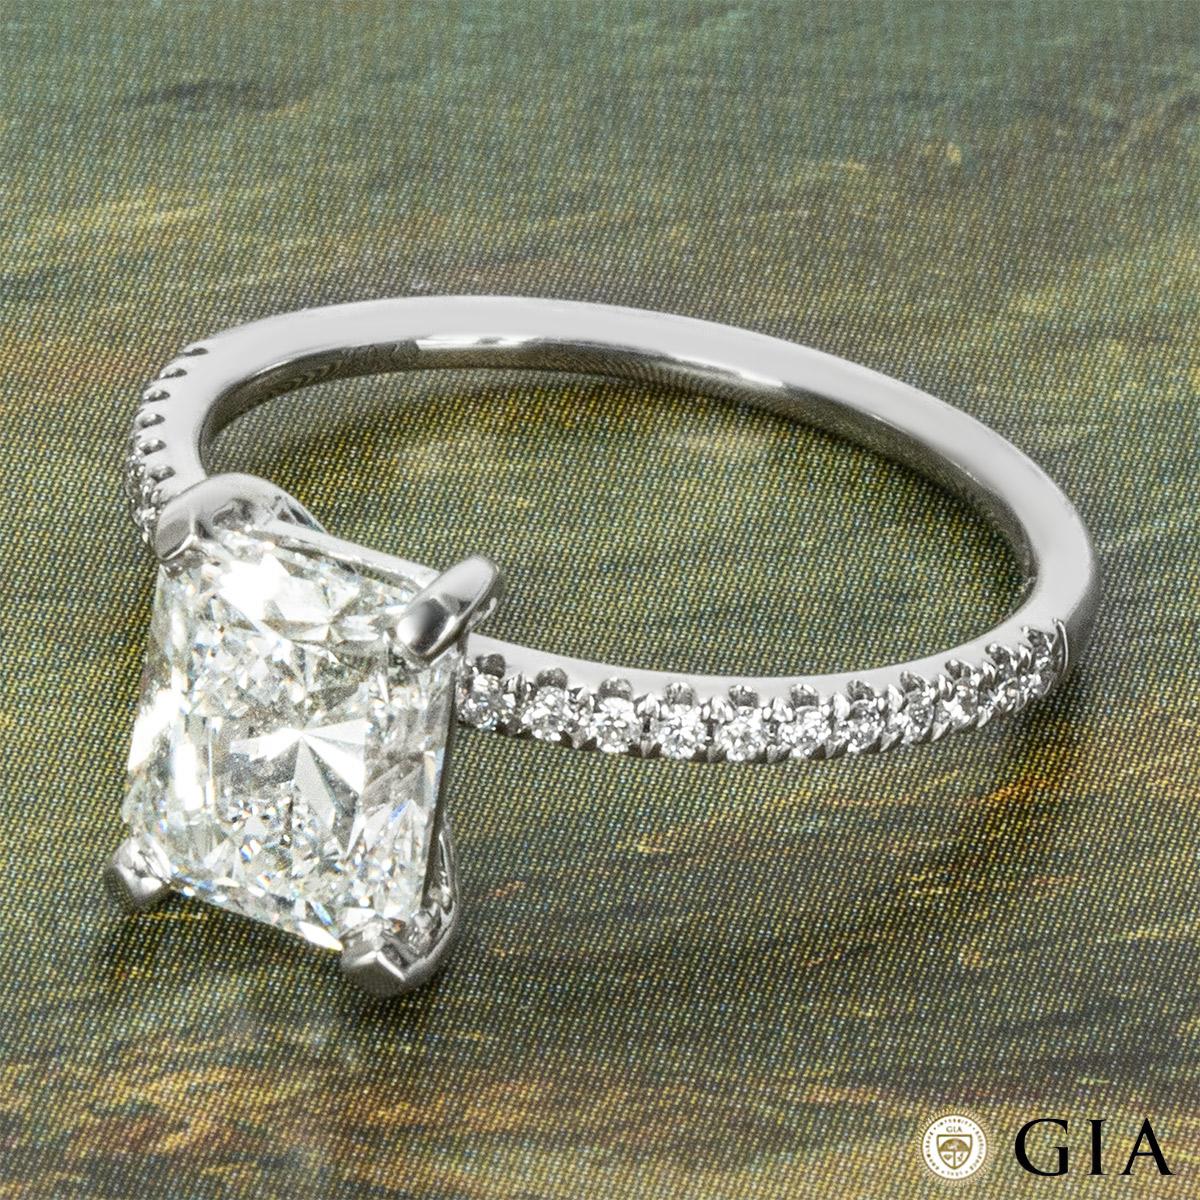 GIA Certified White Gold Radiant Cut Diamond Ring 2.00ct F/SI1 For Sale 3